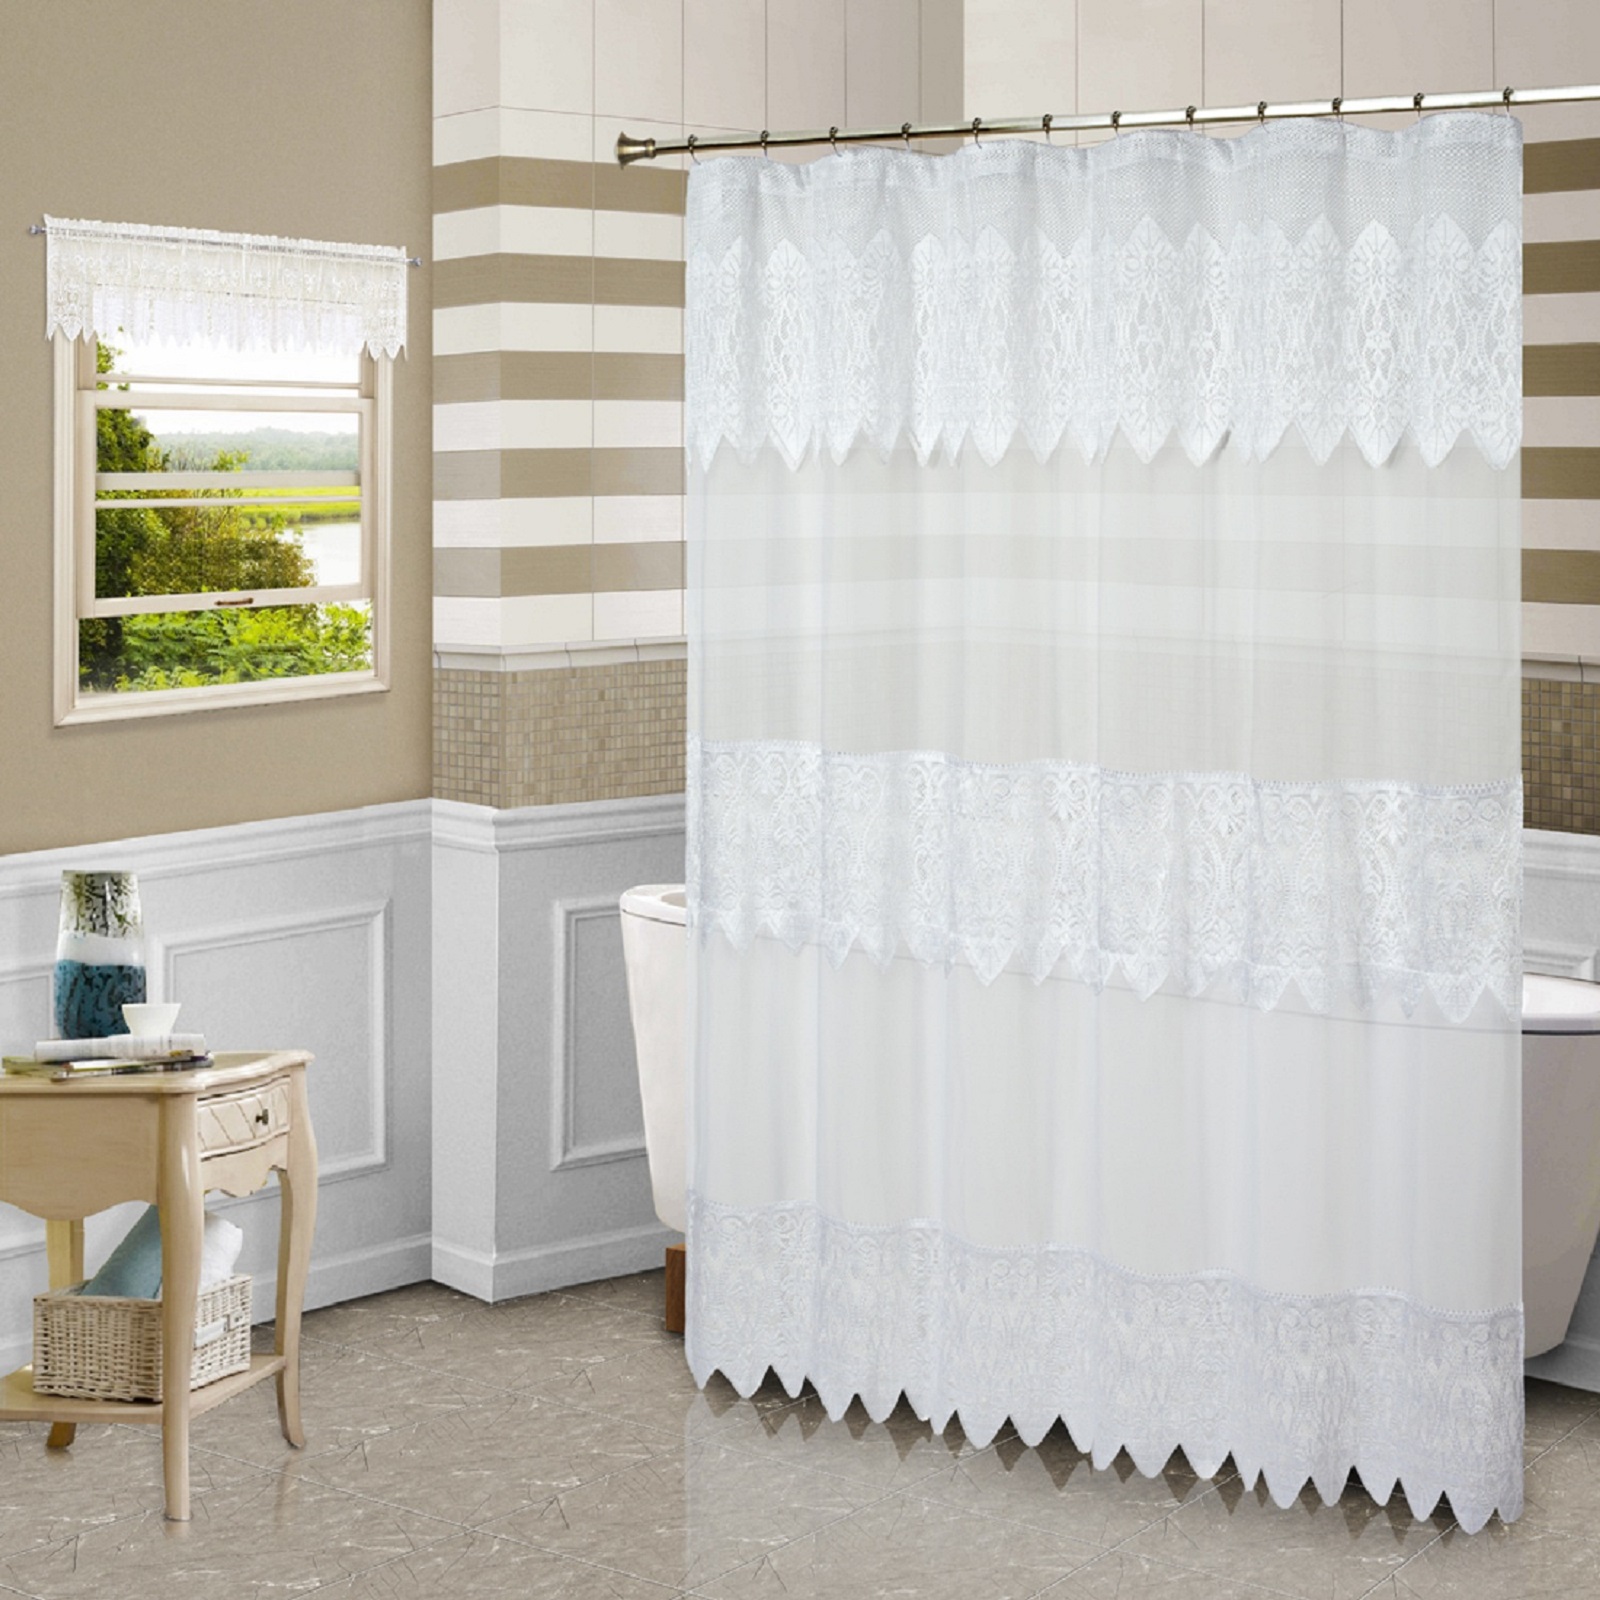 United Curtain Company "Valerie" Free Standing Shower Curtain with Macrame Insets